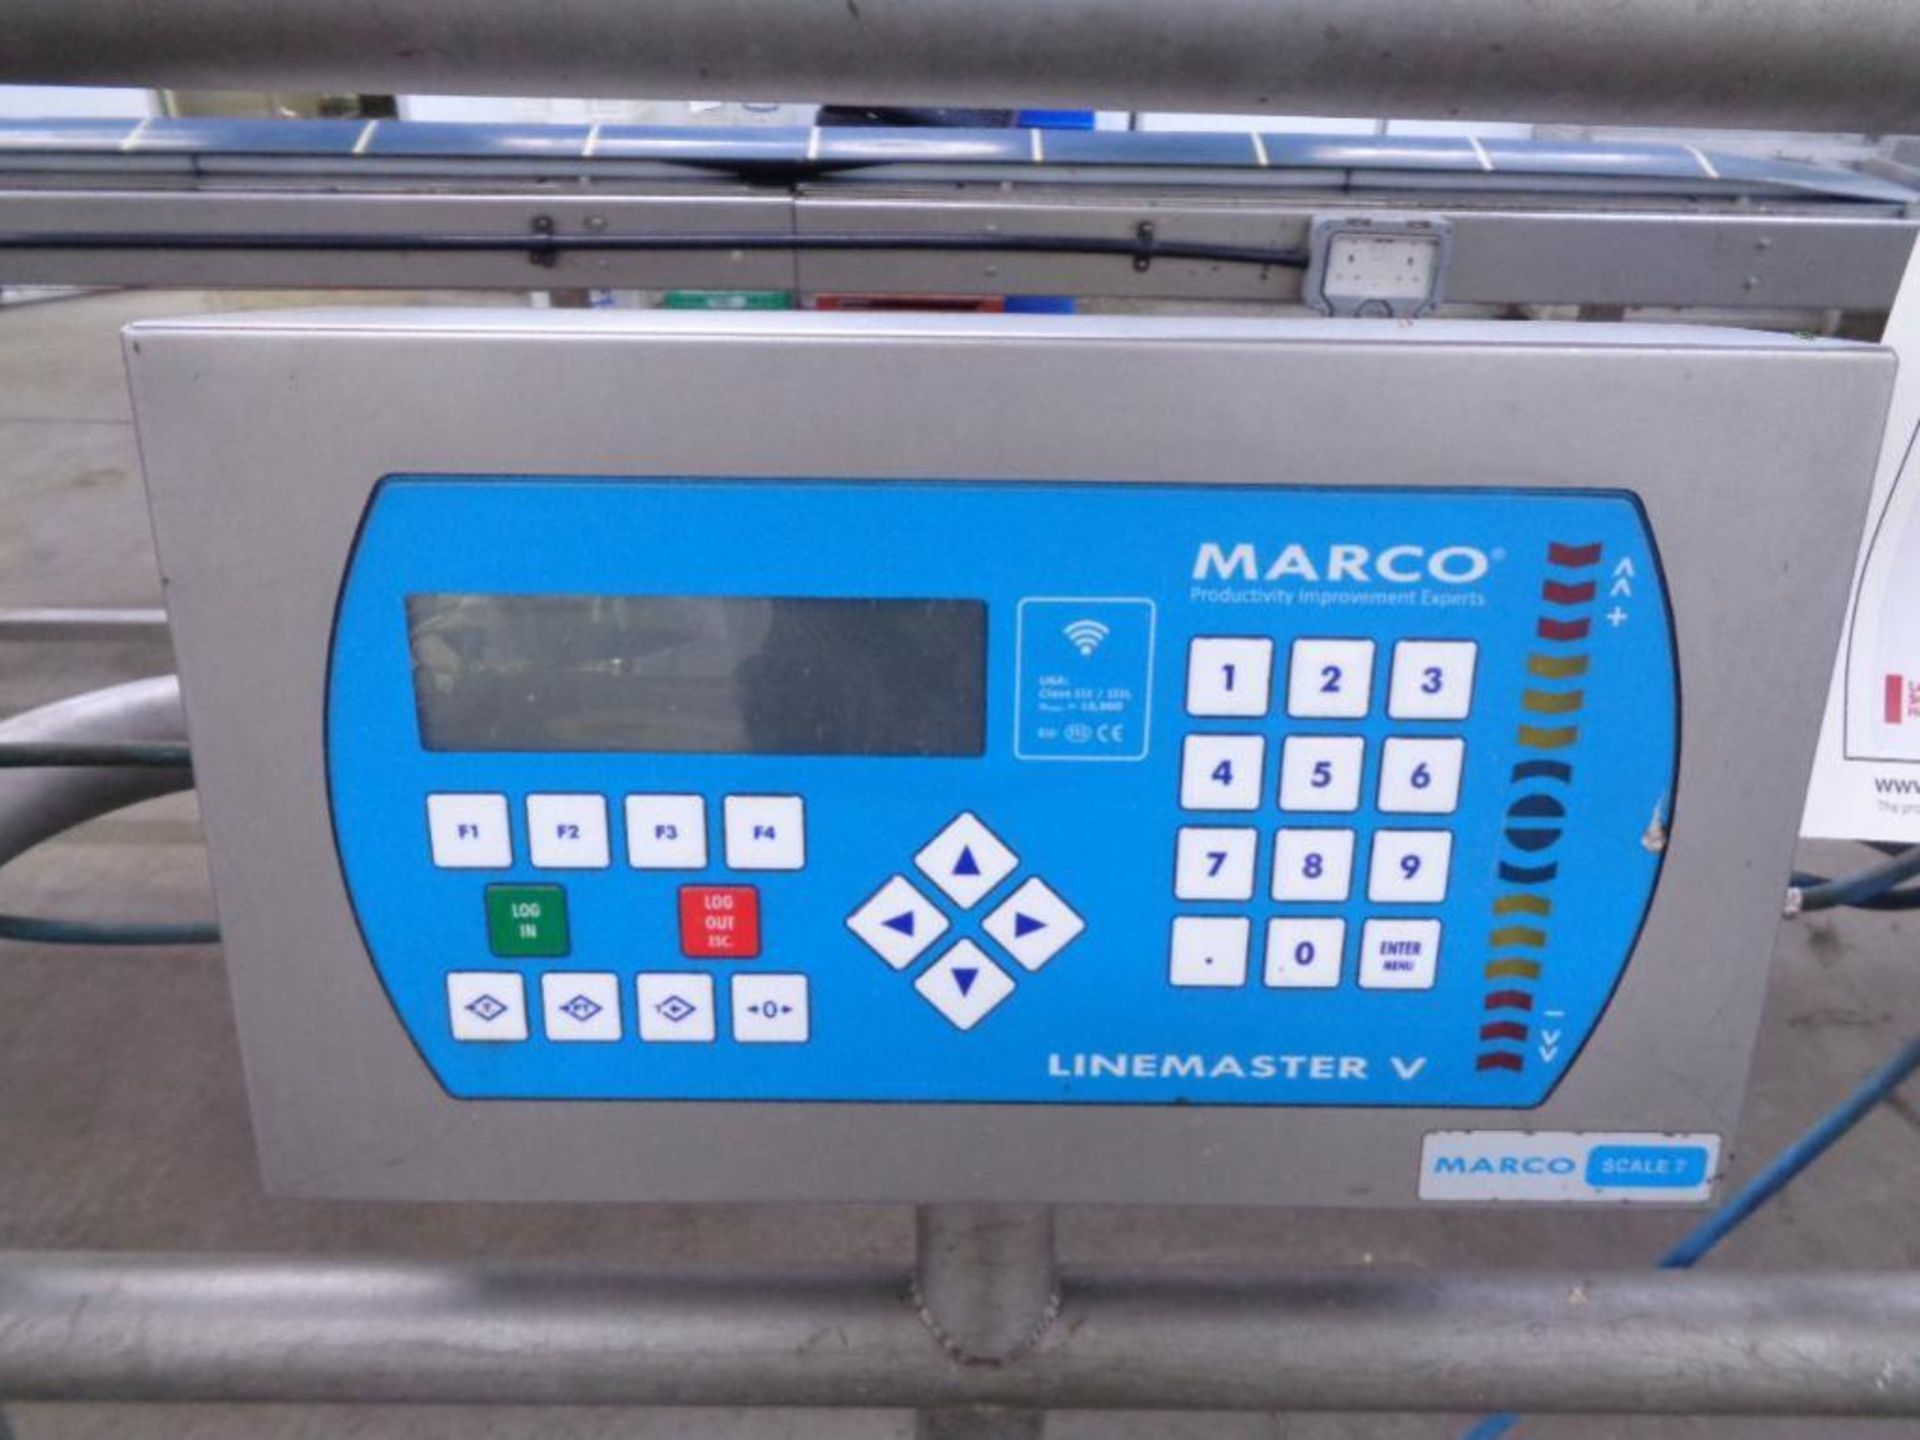 Marco Linemaster V D112540 stainless steel product weigh scales - Image 2 of 4